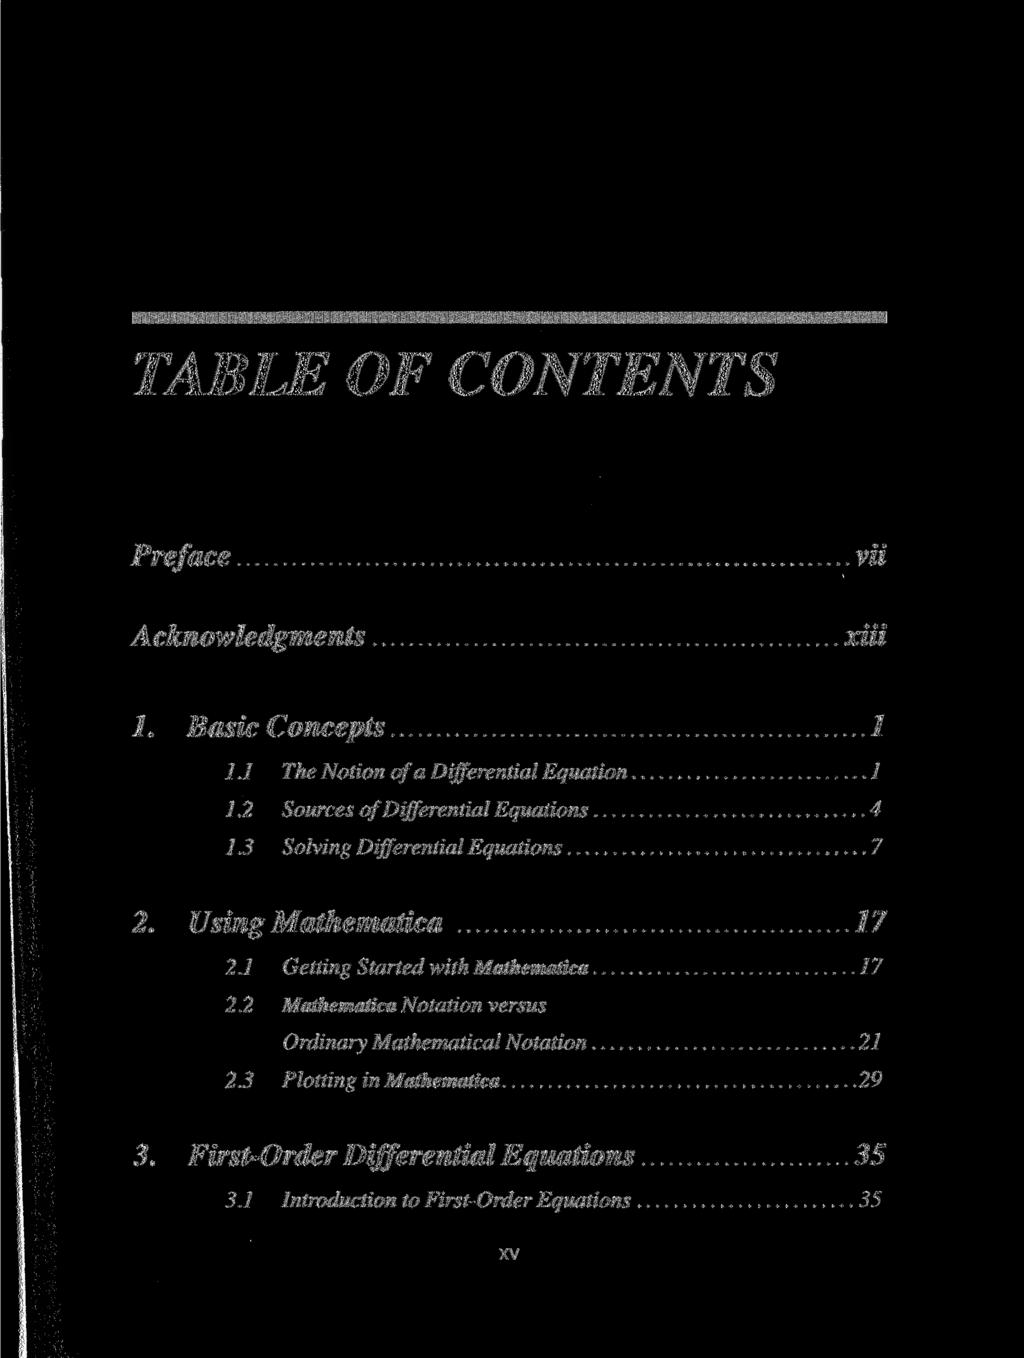 TABLE OF CONTENTS Preface Acknowledgments vii xiii 1. Basic Concepts 1 1.1 The Notion ofa Differential Equation 1 1.2 Sources of Differential Equations 4 1.3 Solving Differential Equations 7 2.